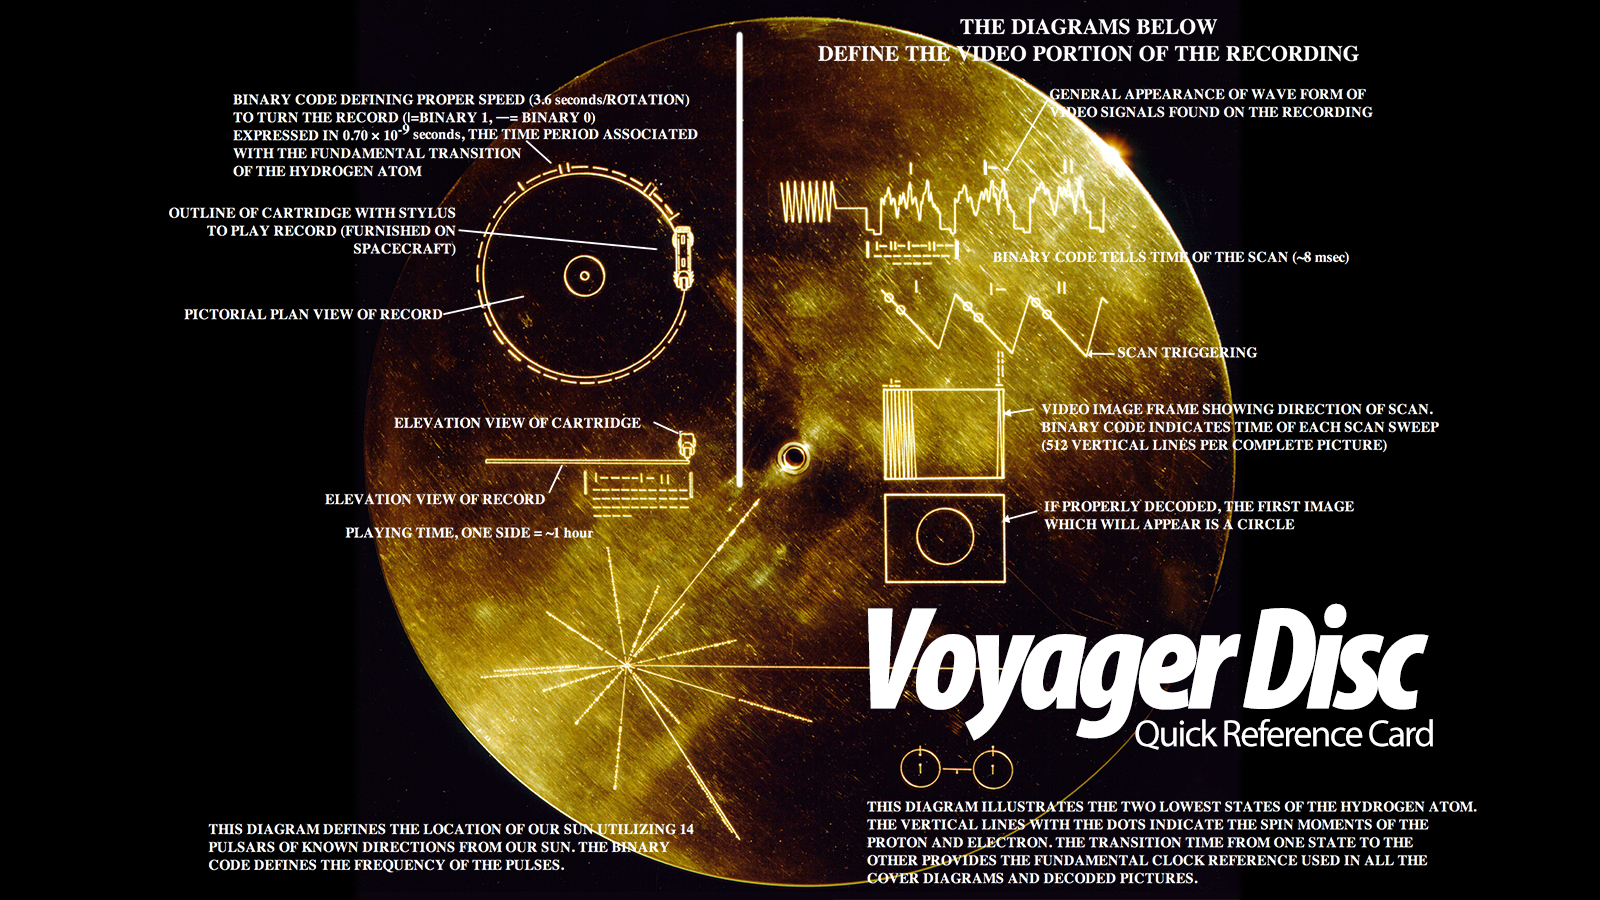 what are facts about voyager 1